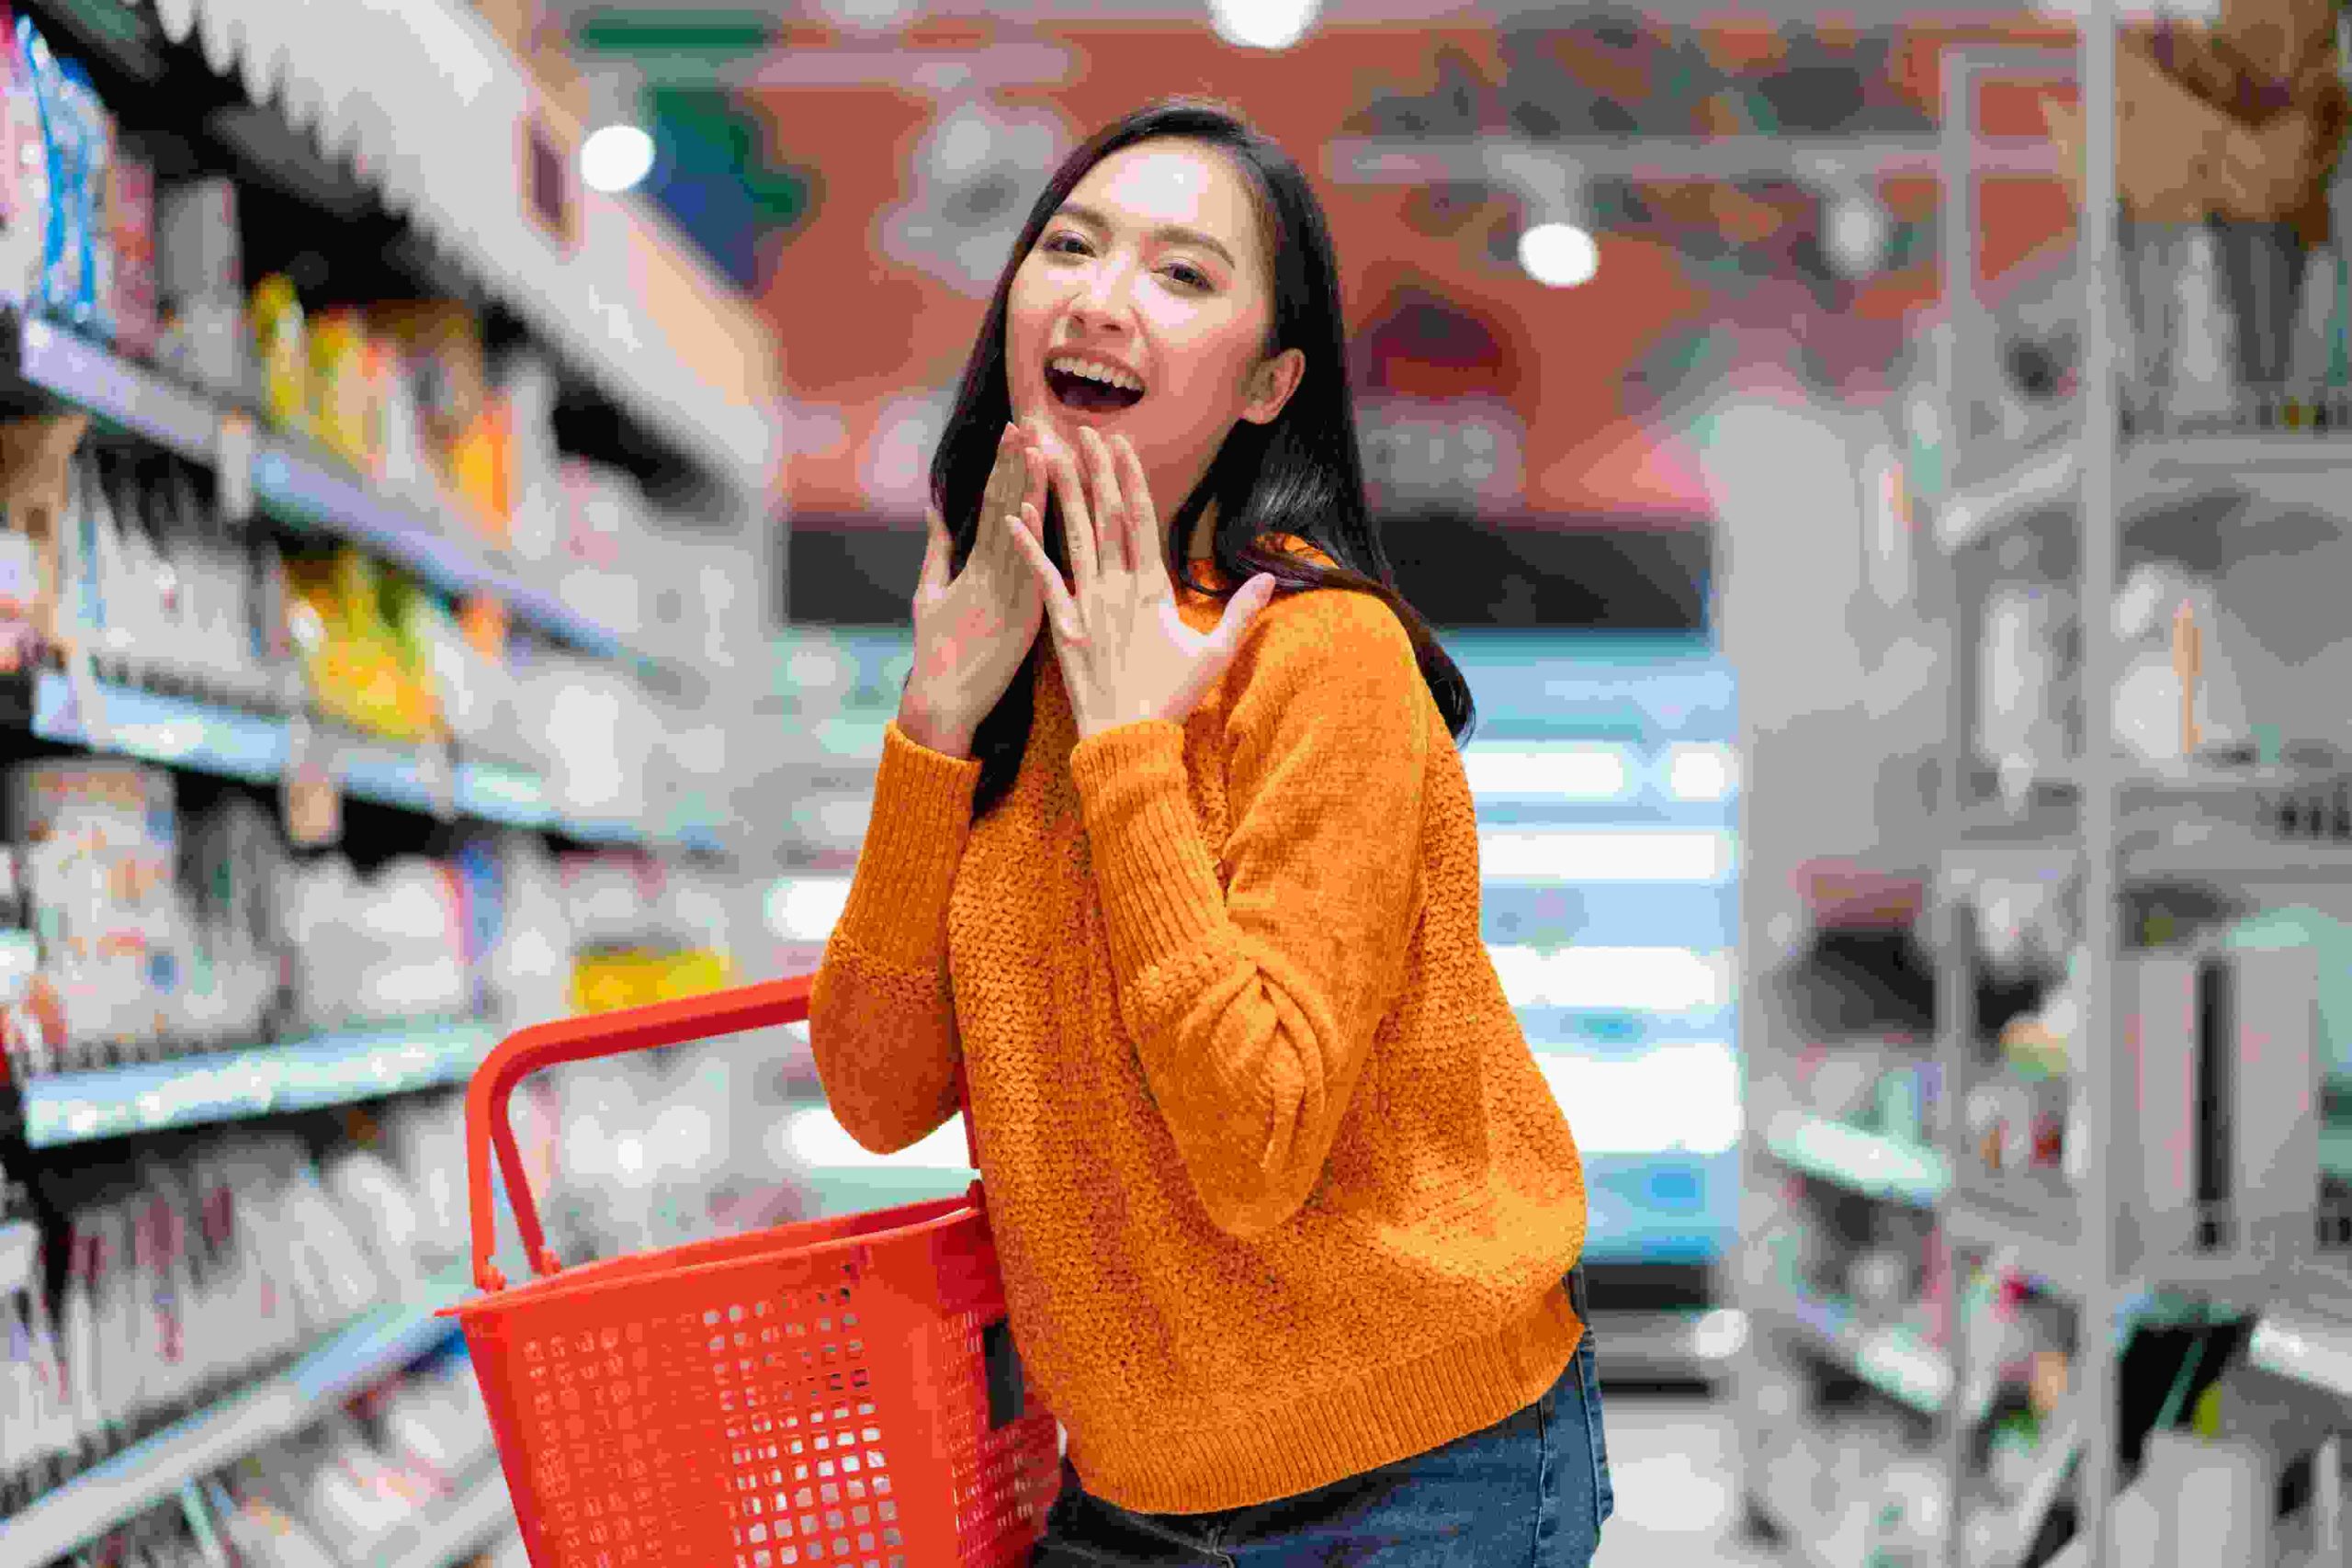 smiling-cheerful-joyful-female-woman-hand-hold-shopping-basket-hand-gesture-greeting-surprise-standing-supermarket-product-shelf-aisel-convenience-store-supermarket-department-store-mall